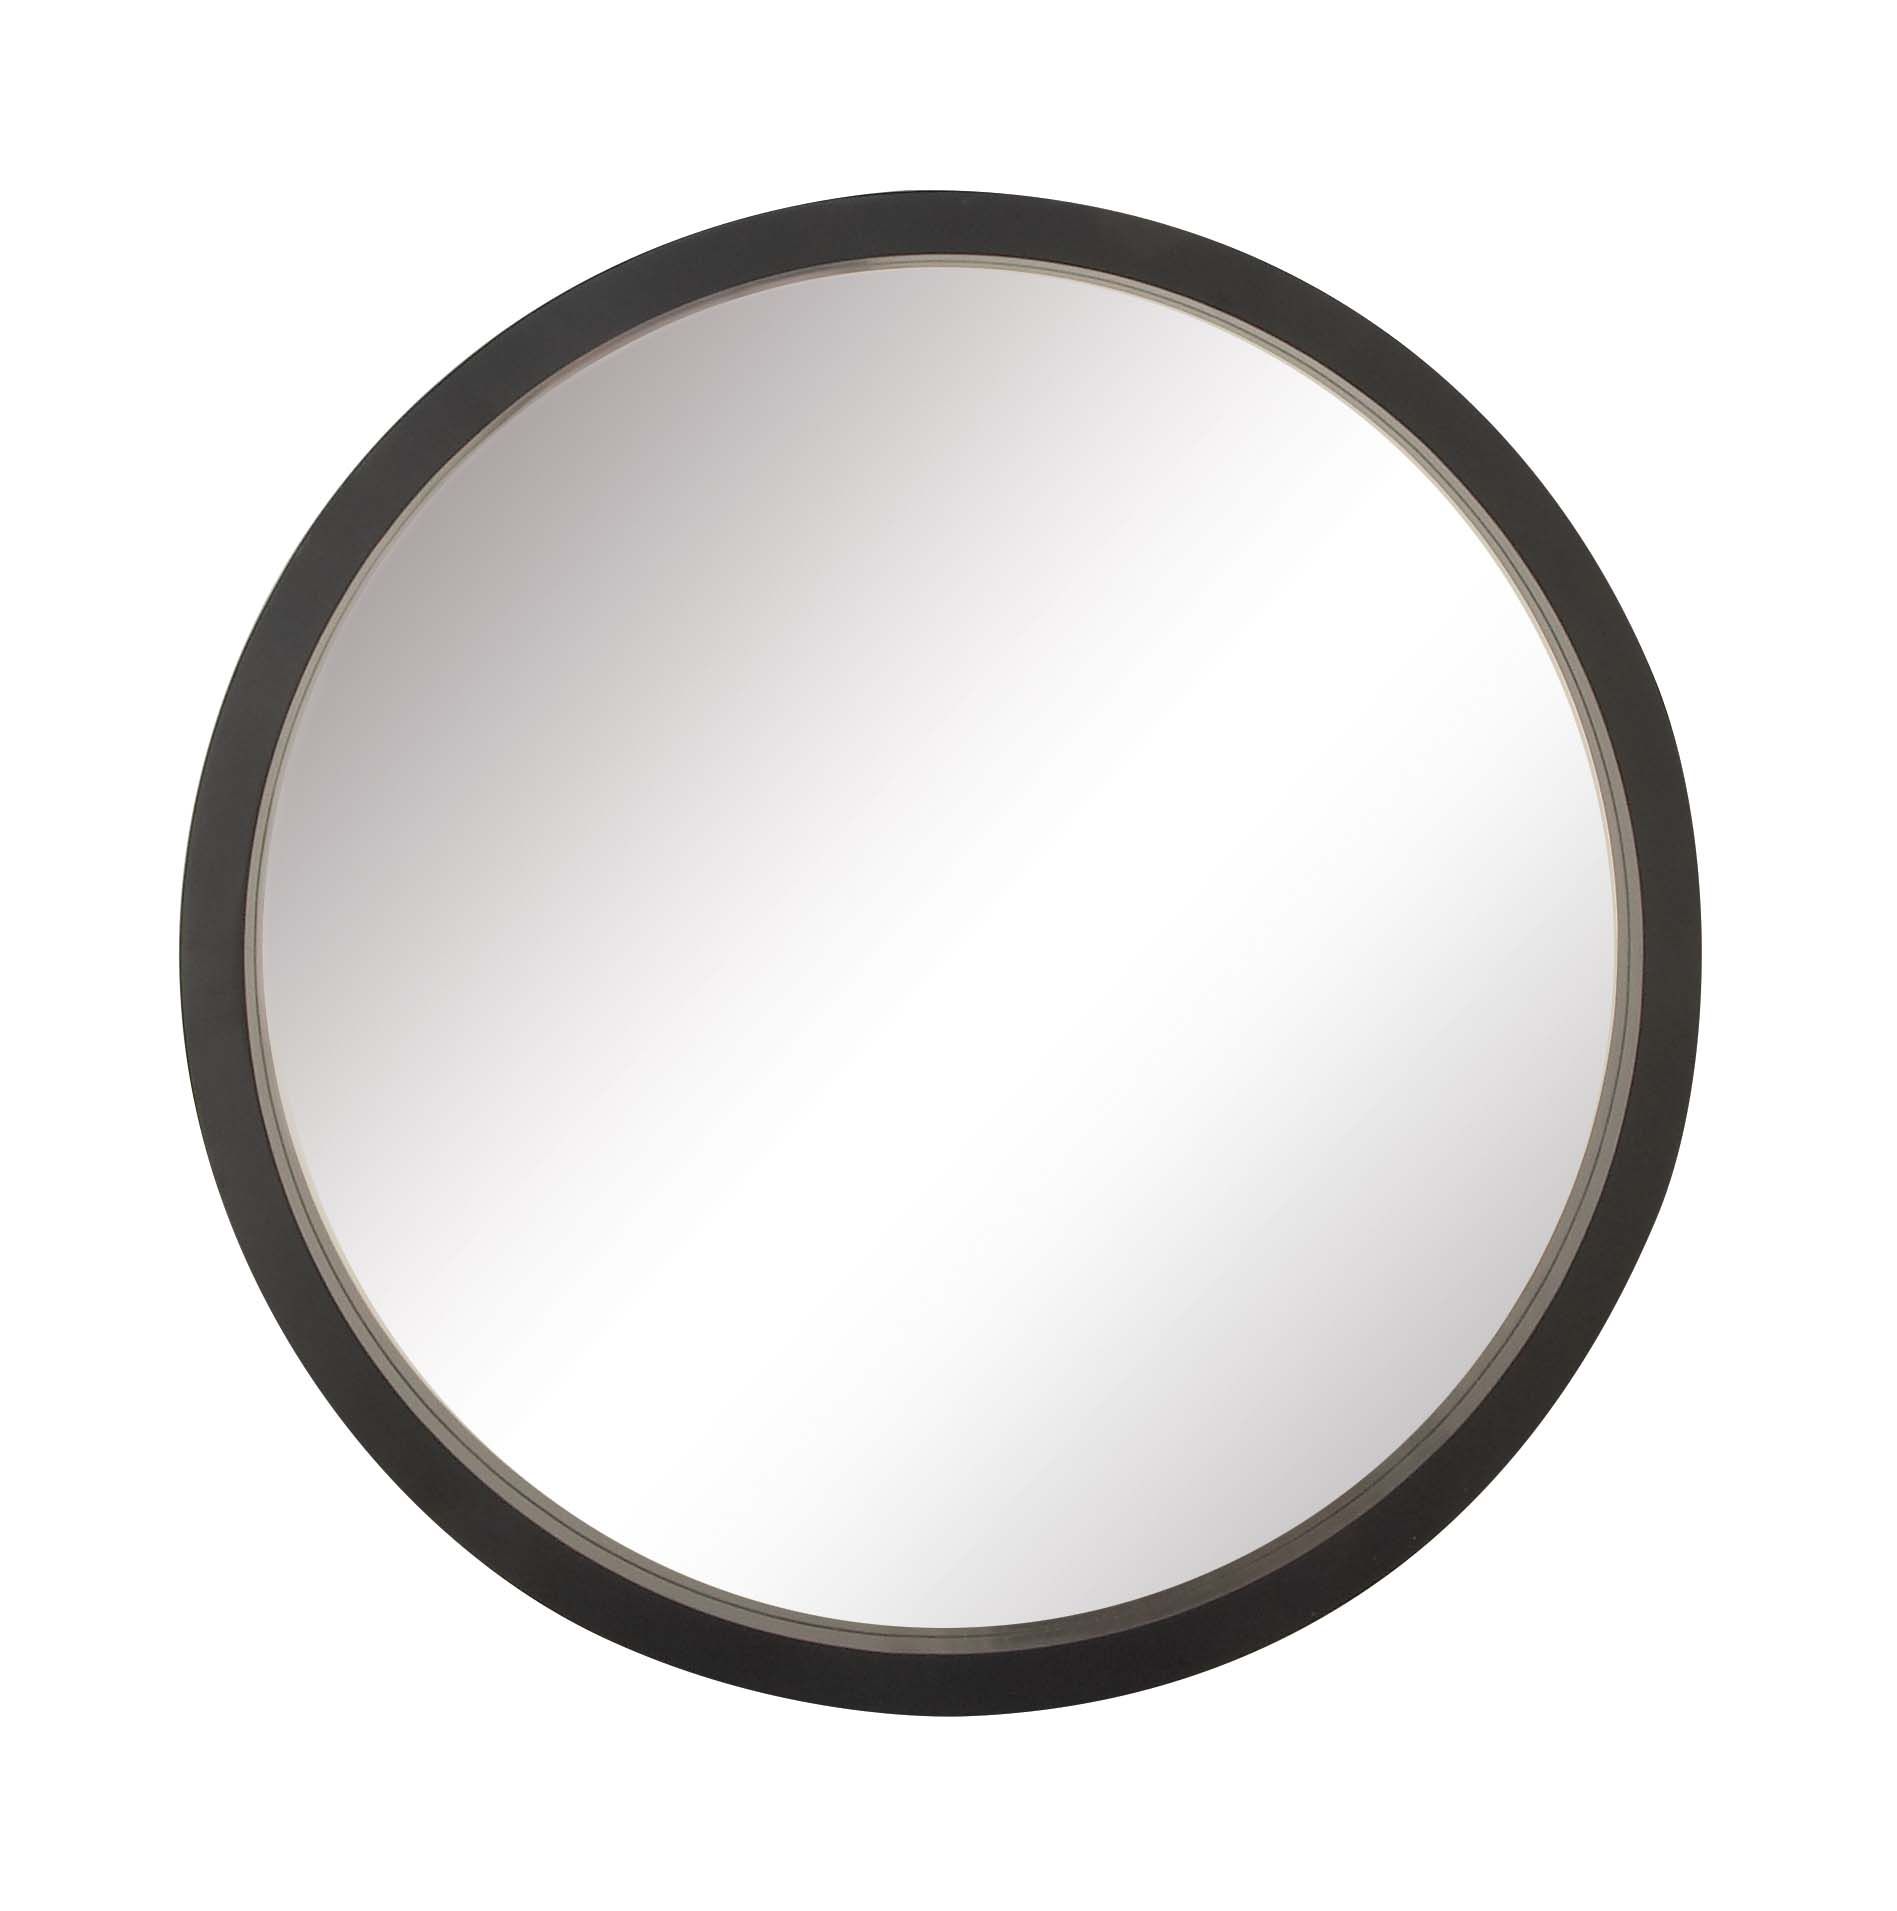 Decmode 32 Inch Contemporary Wooden Framed Round Wall Mirror, Black For Round 4 Section Wall Mirrors (View 3 of 15)